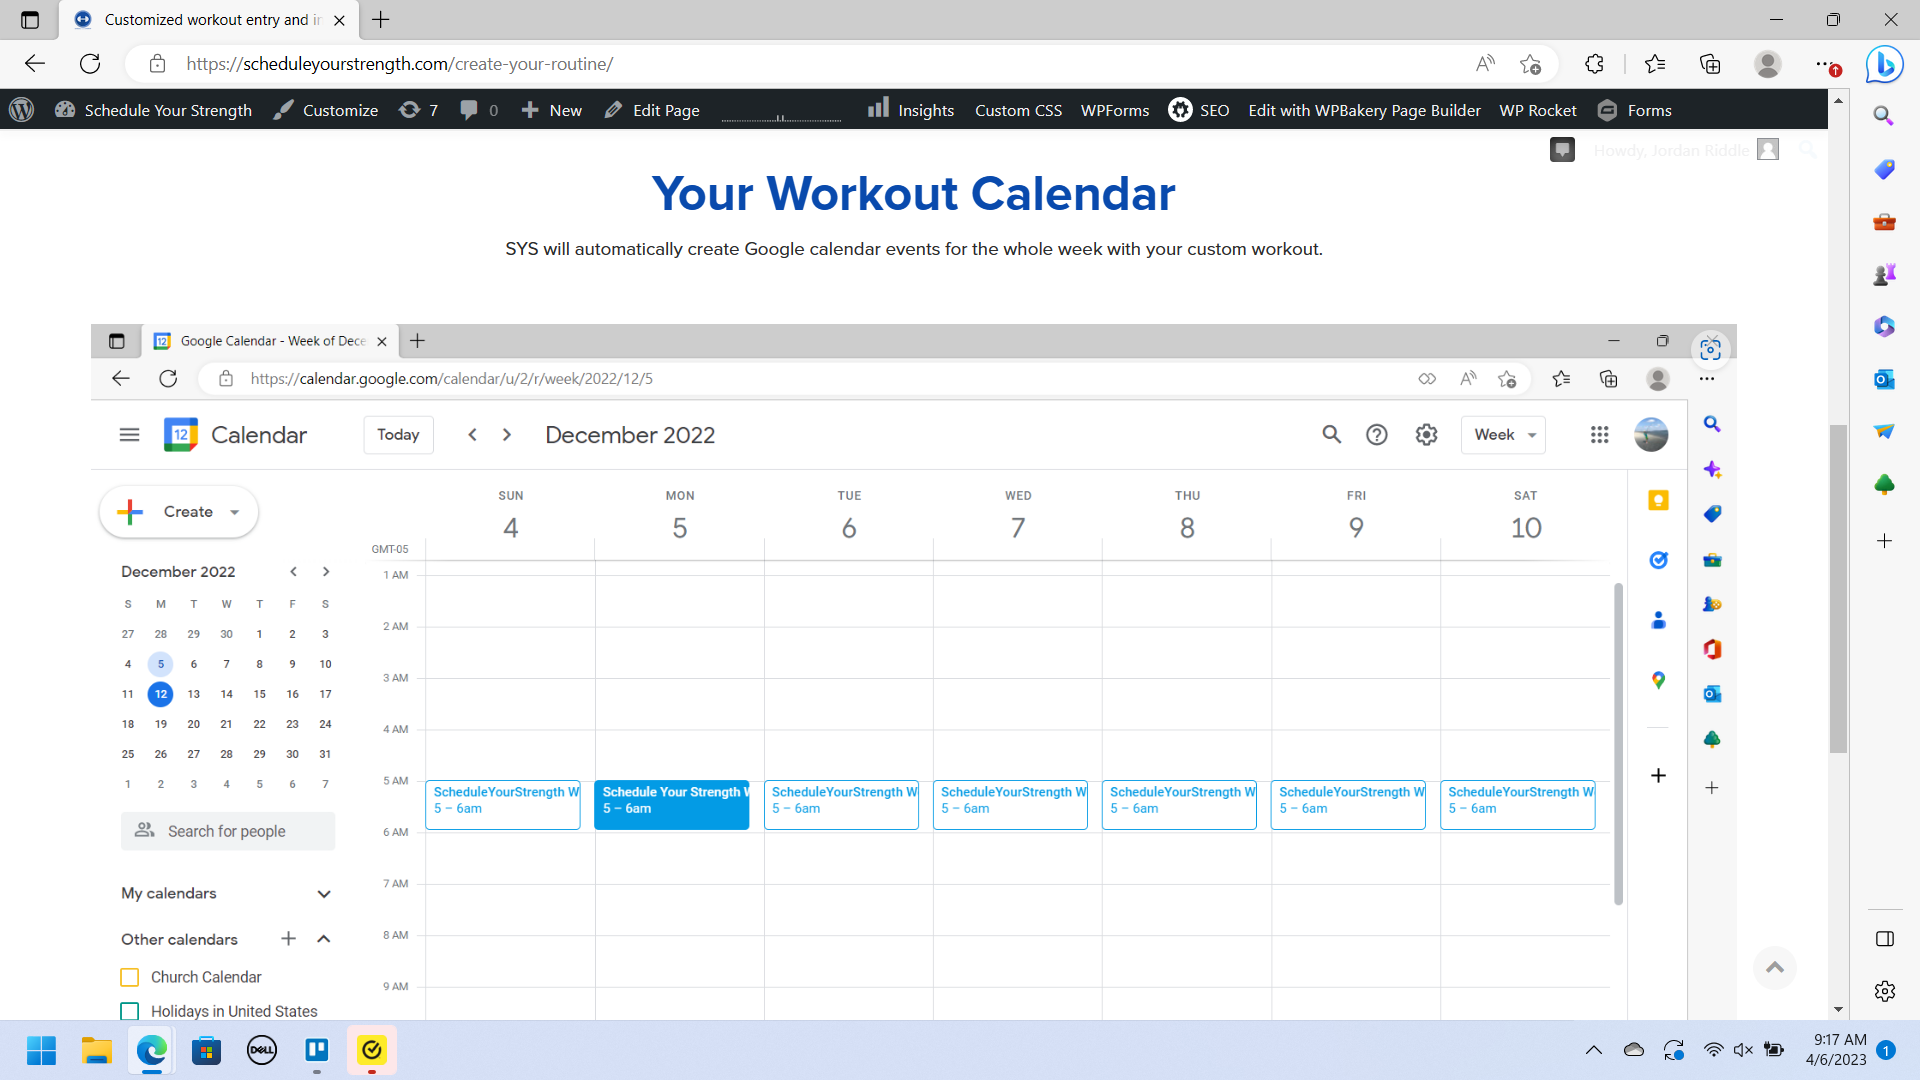 Calendar events can be viewed online or in the Google app